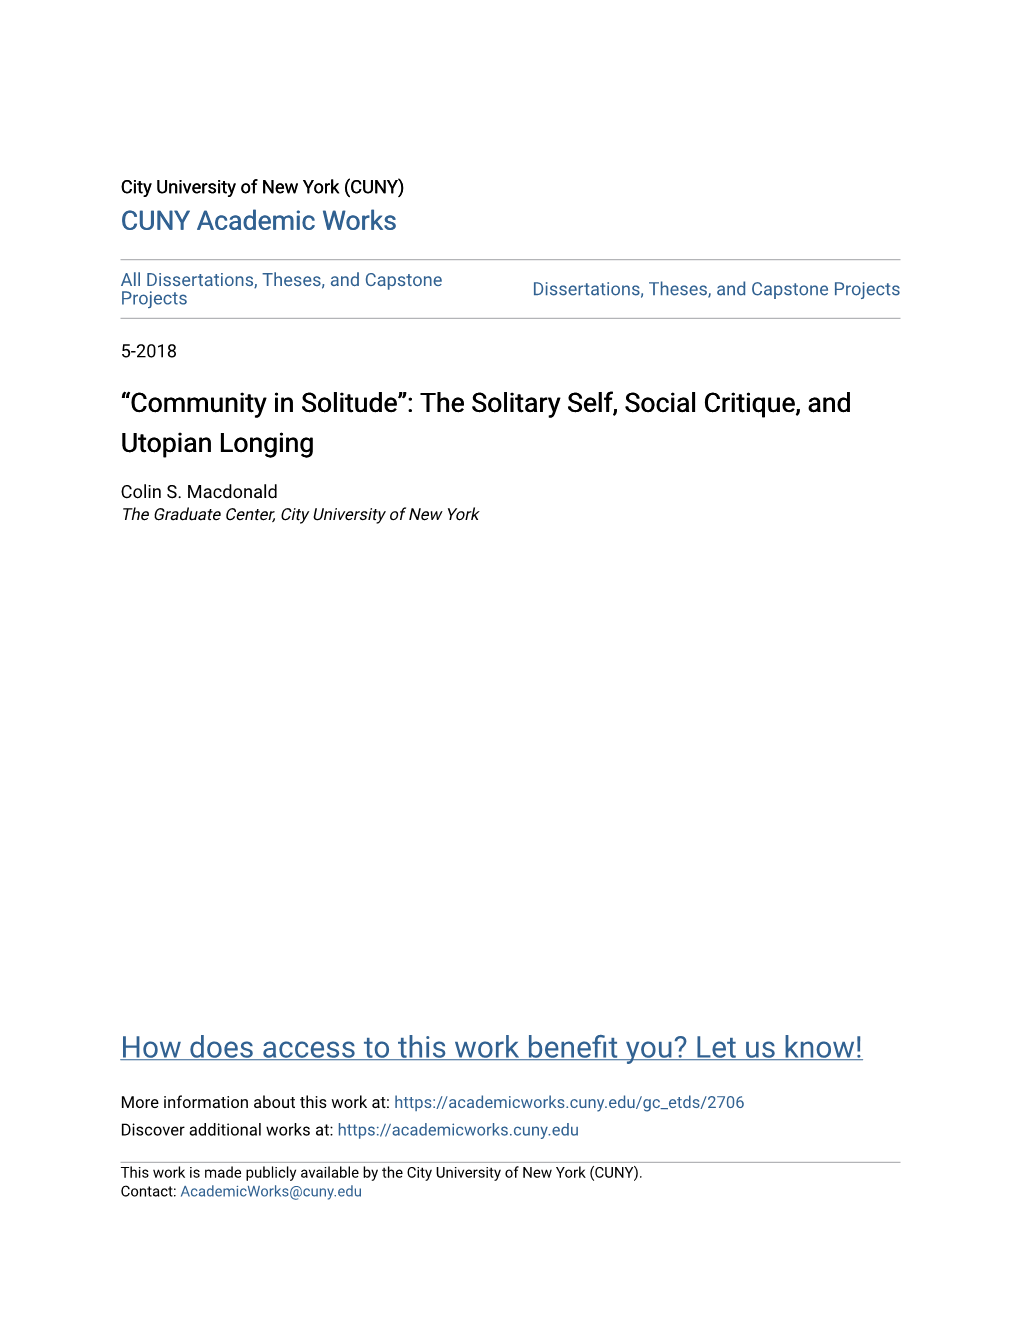 Community in Solitude”: the Solitary Self, Social Critique, and Utopian Longing